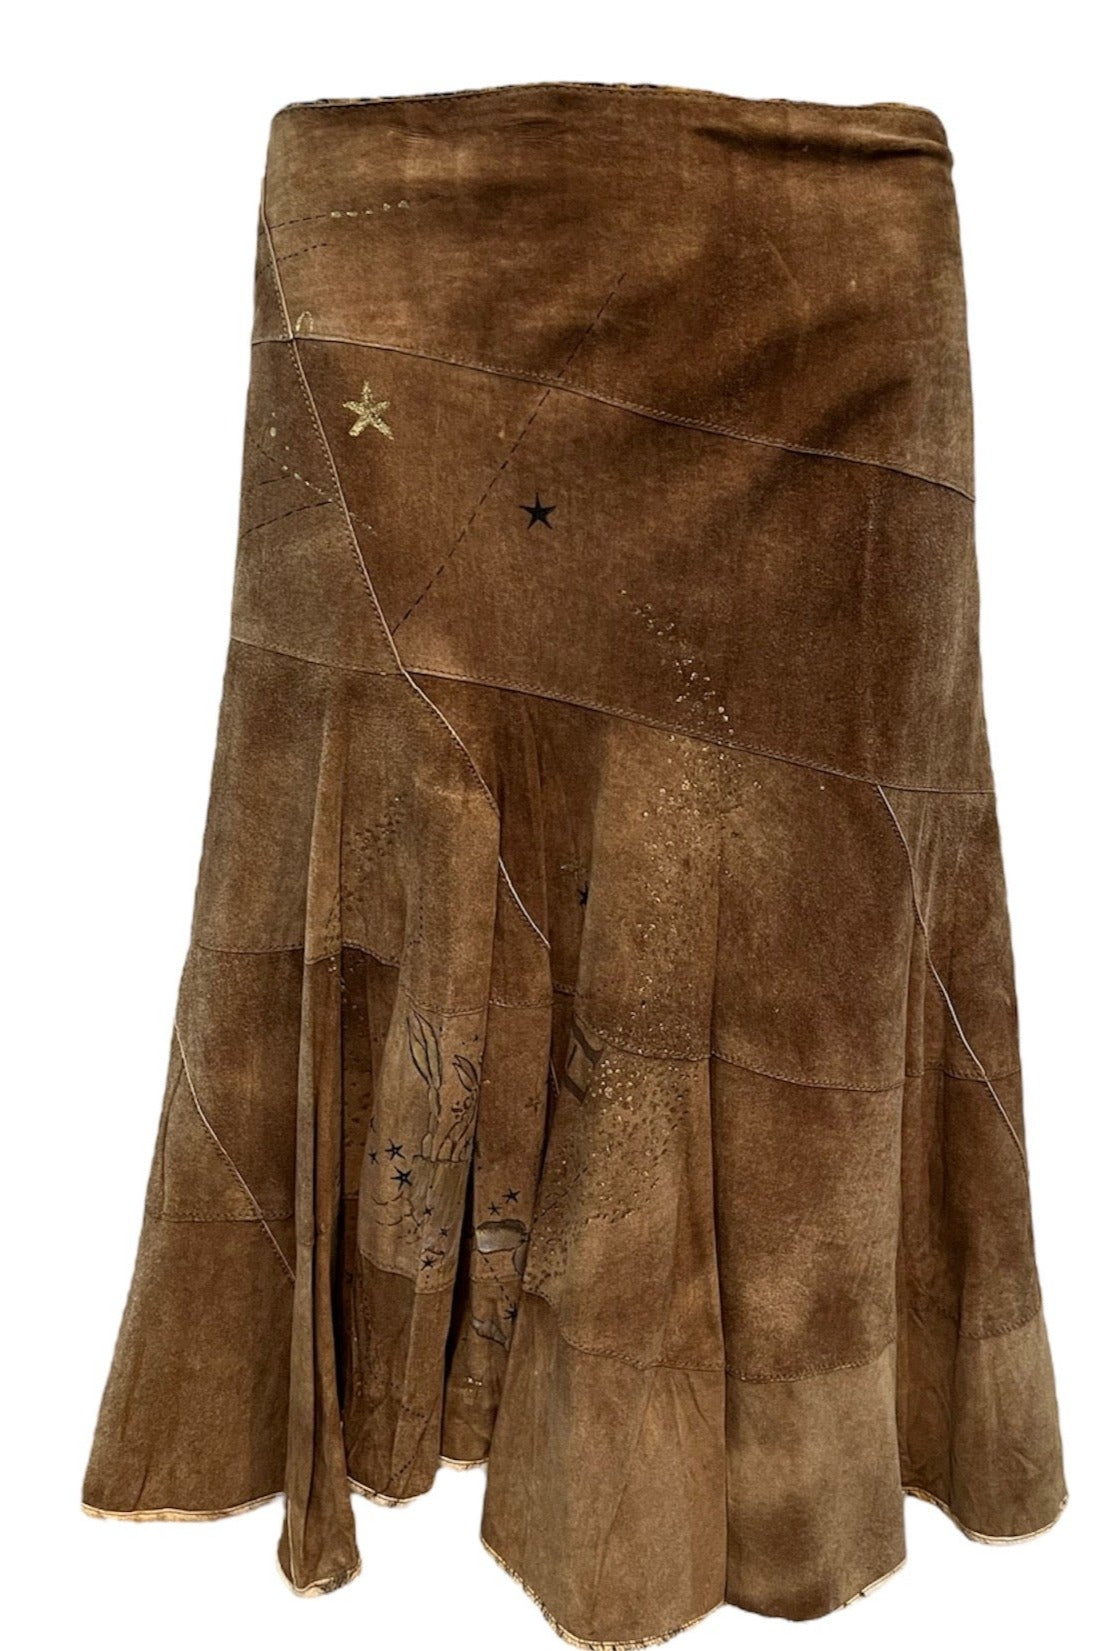  Roberto Cavalli Y2K Brown Suede Patchwork Skirt with Hand Painting. BACK 3 of 5